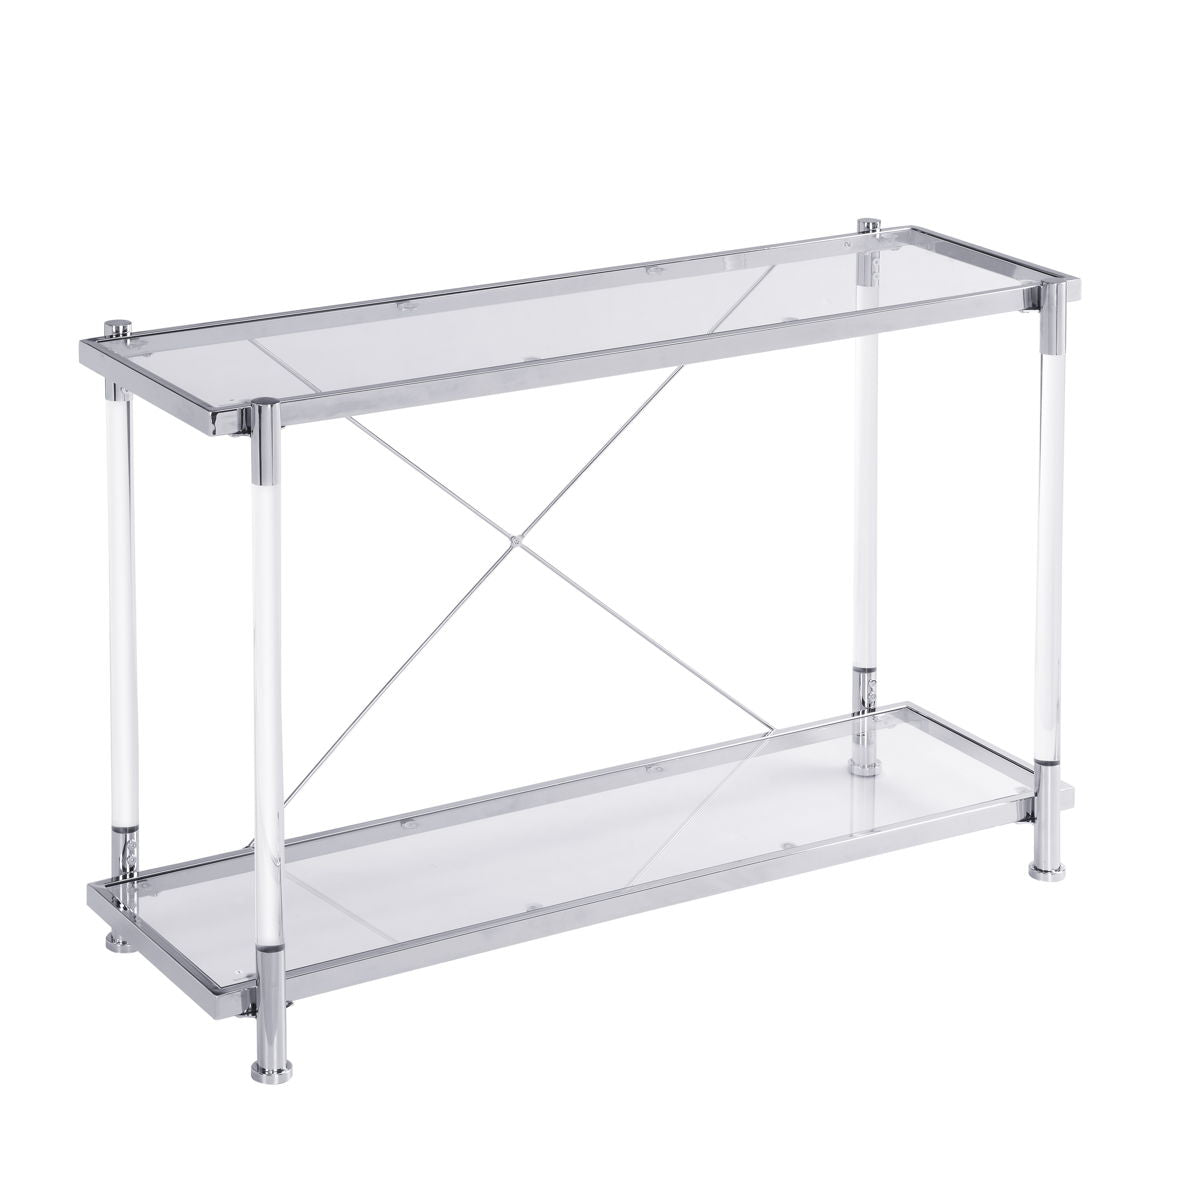 Acrylic Glass Side Table, Chrome Sofa Table, Console Table For Living Room & Bedroom